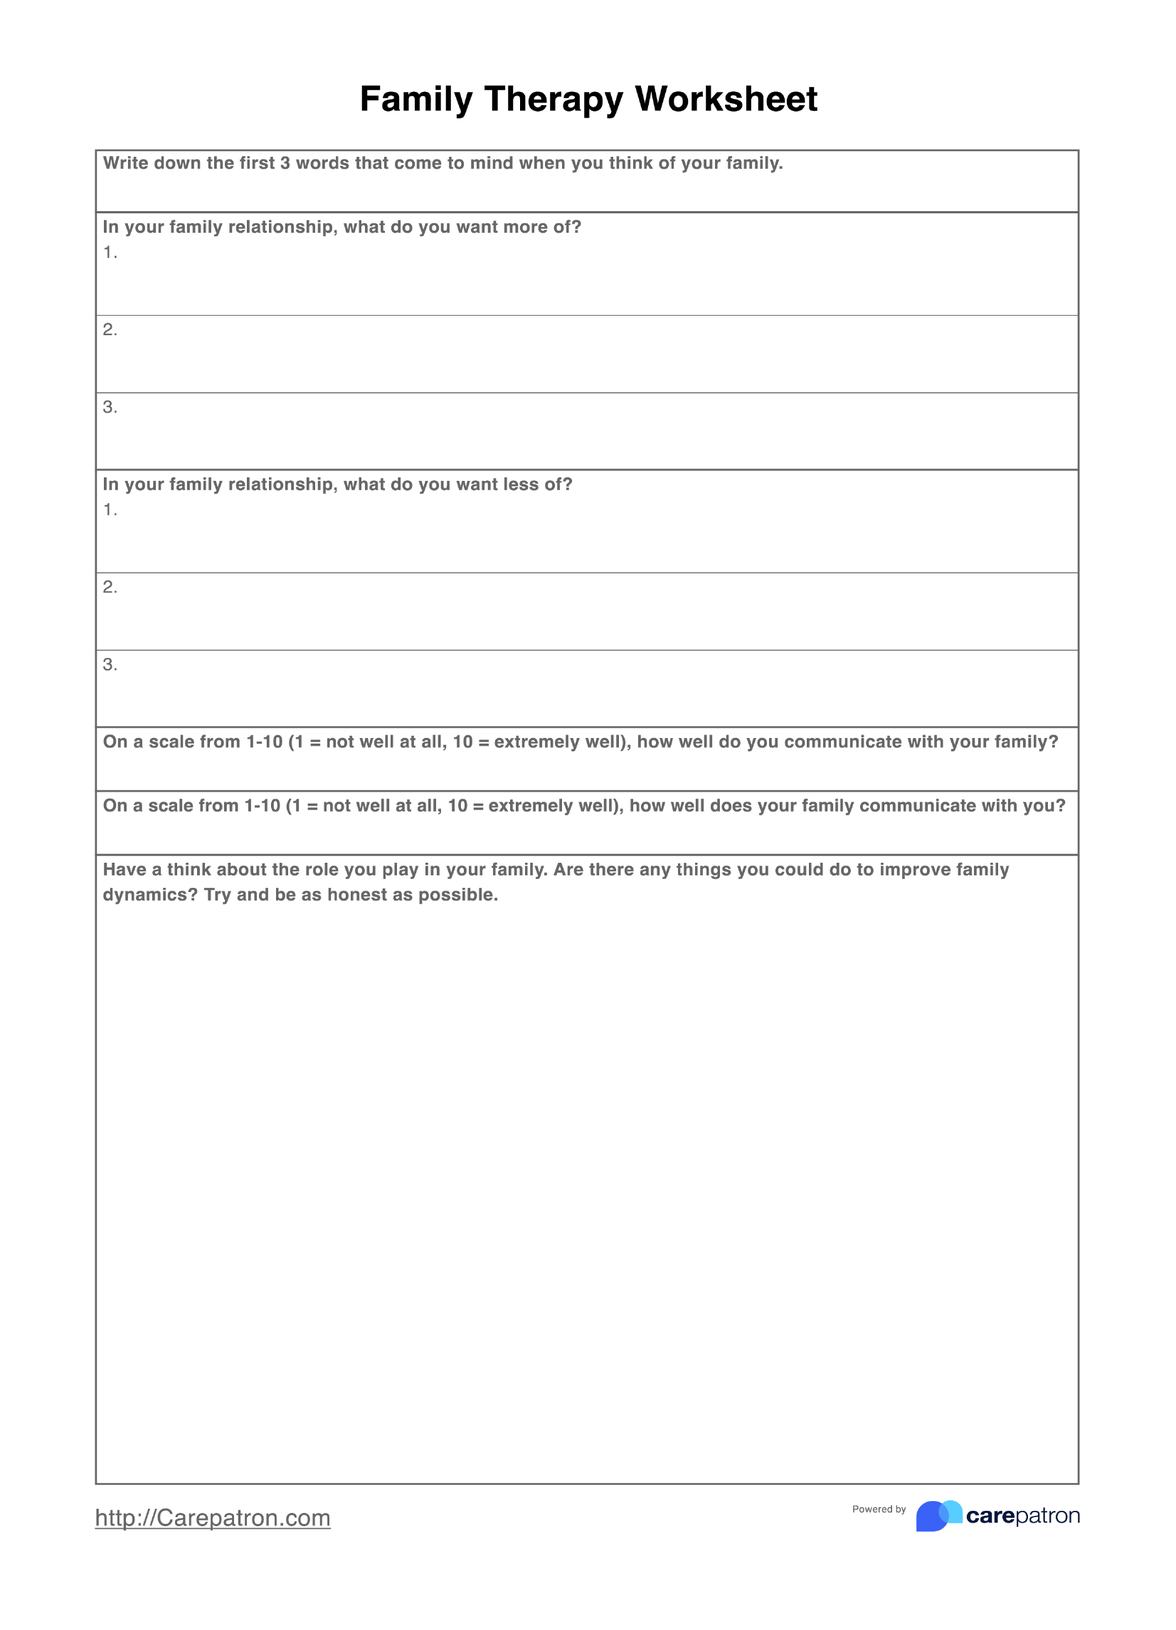 Family Therapy Worksheets PDF Example